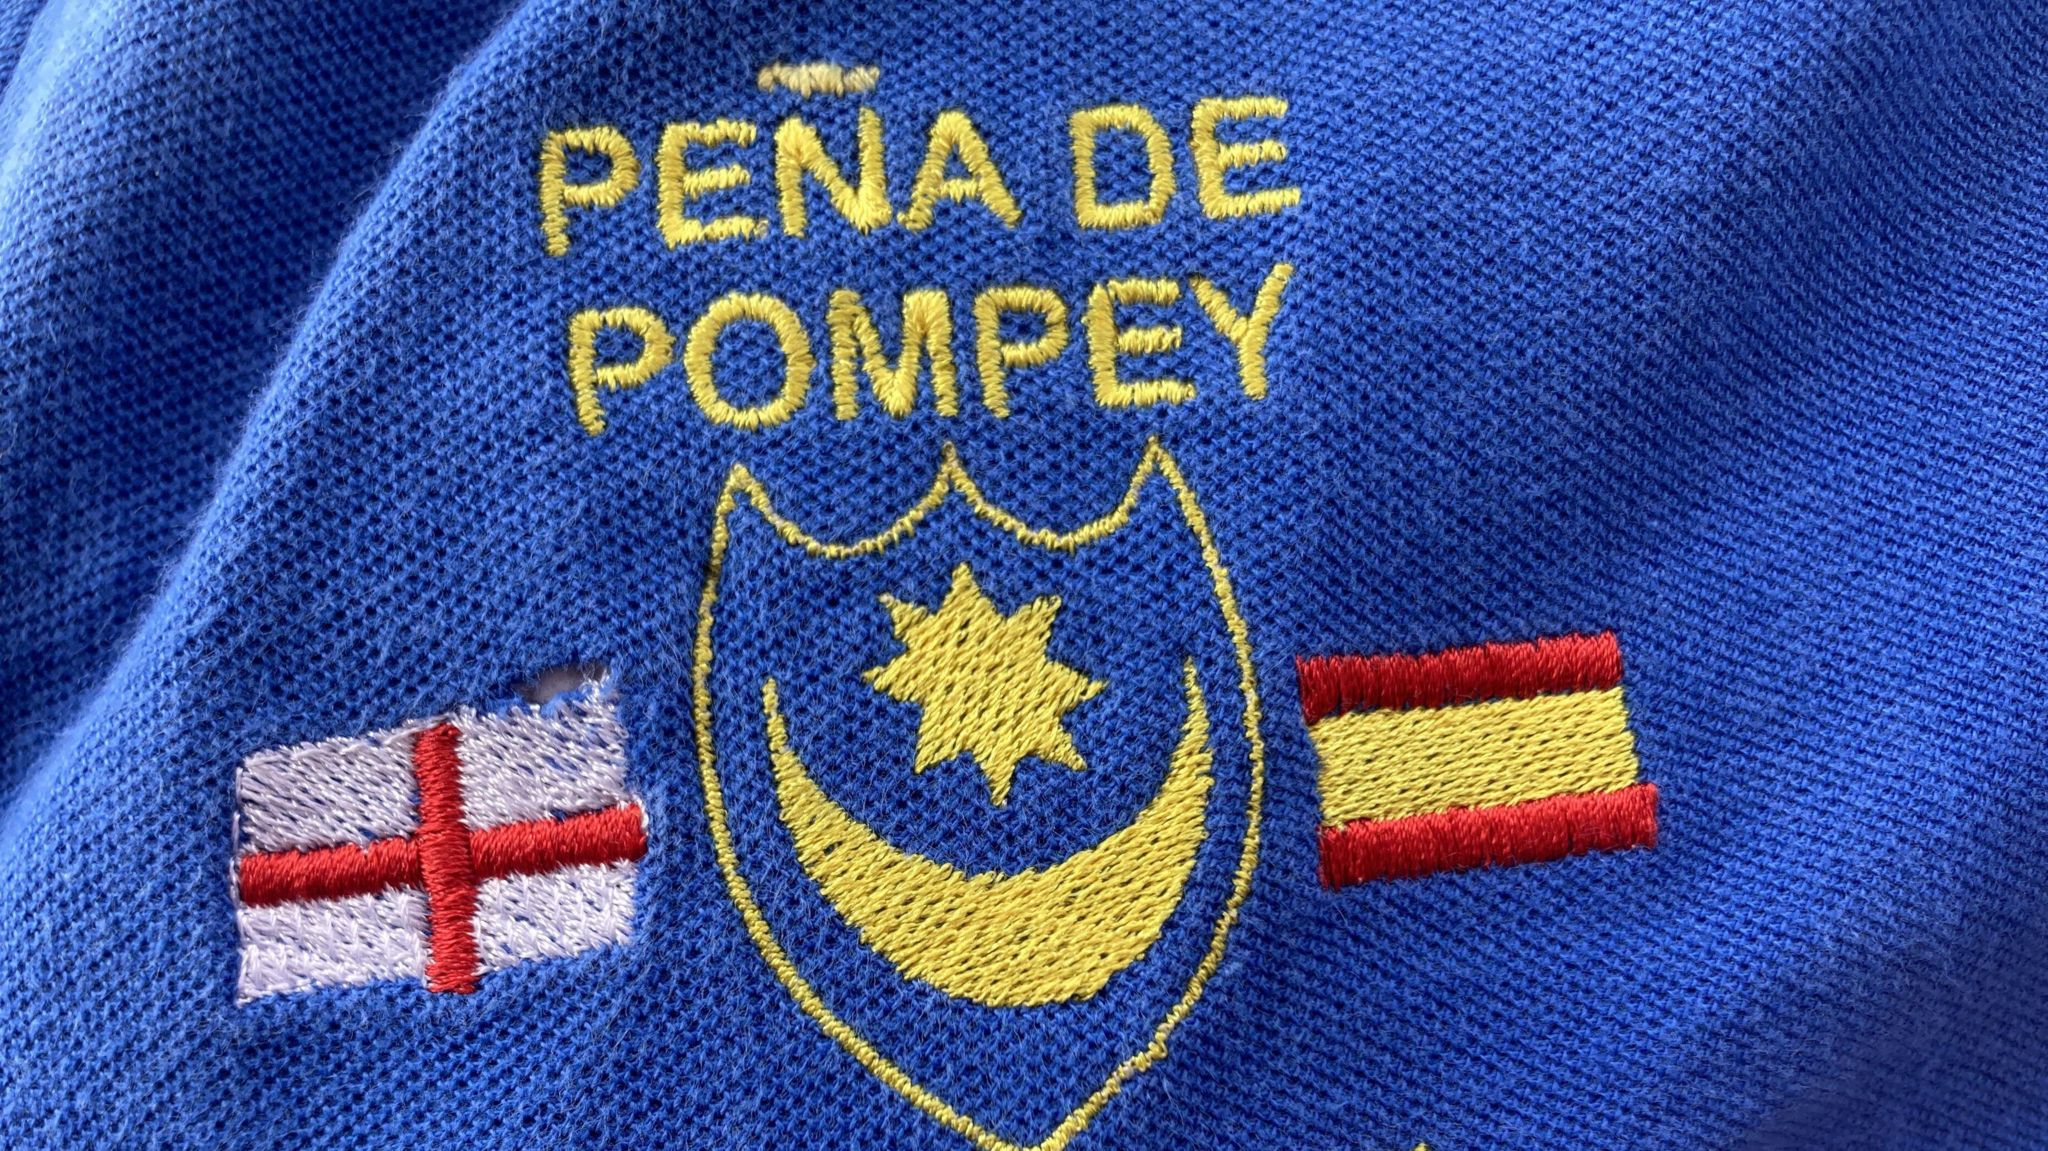 Pompey crest with England and Spain flags